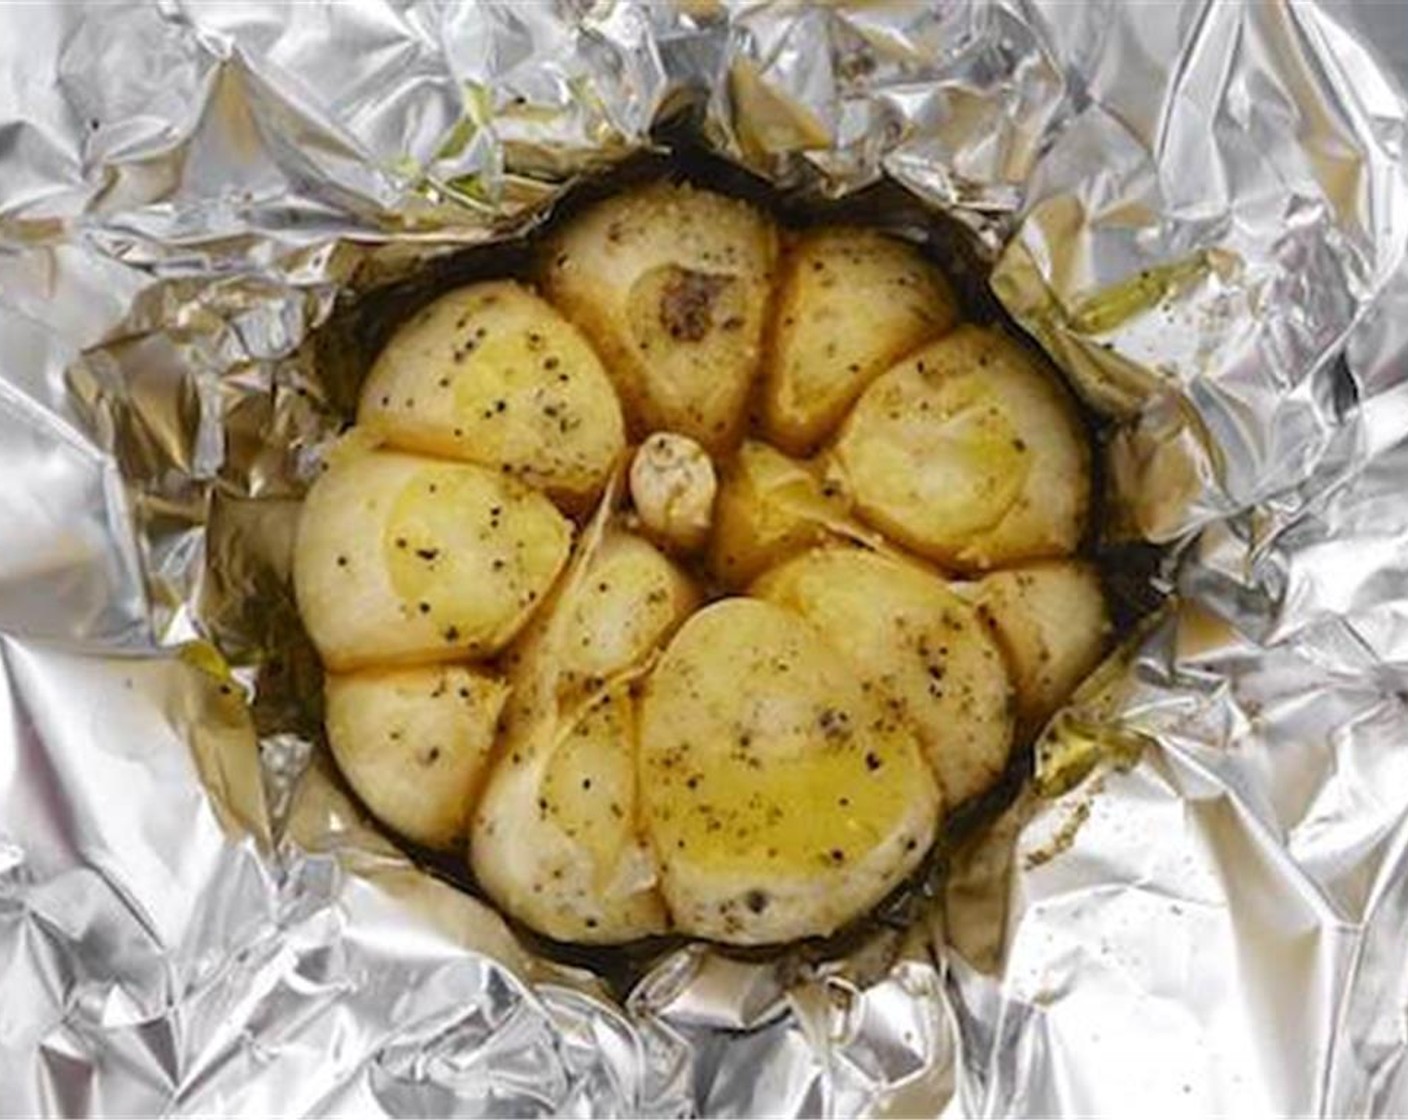 step 4 Then wrap each half bulb in a piece of tinfoil and drizzle with some Olive Oil (1 Tbsp), Dried Mixed Herbs (1/2 tsp), Salt (to taste) and Ground Black Pepper (to taste).